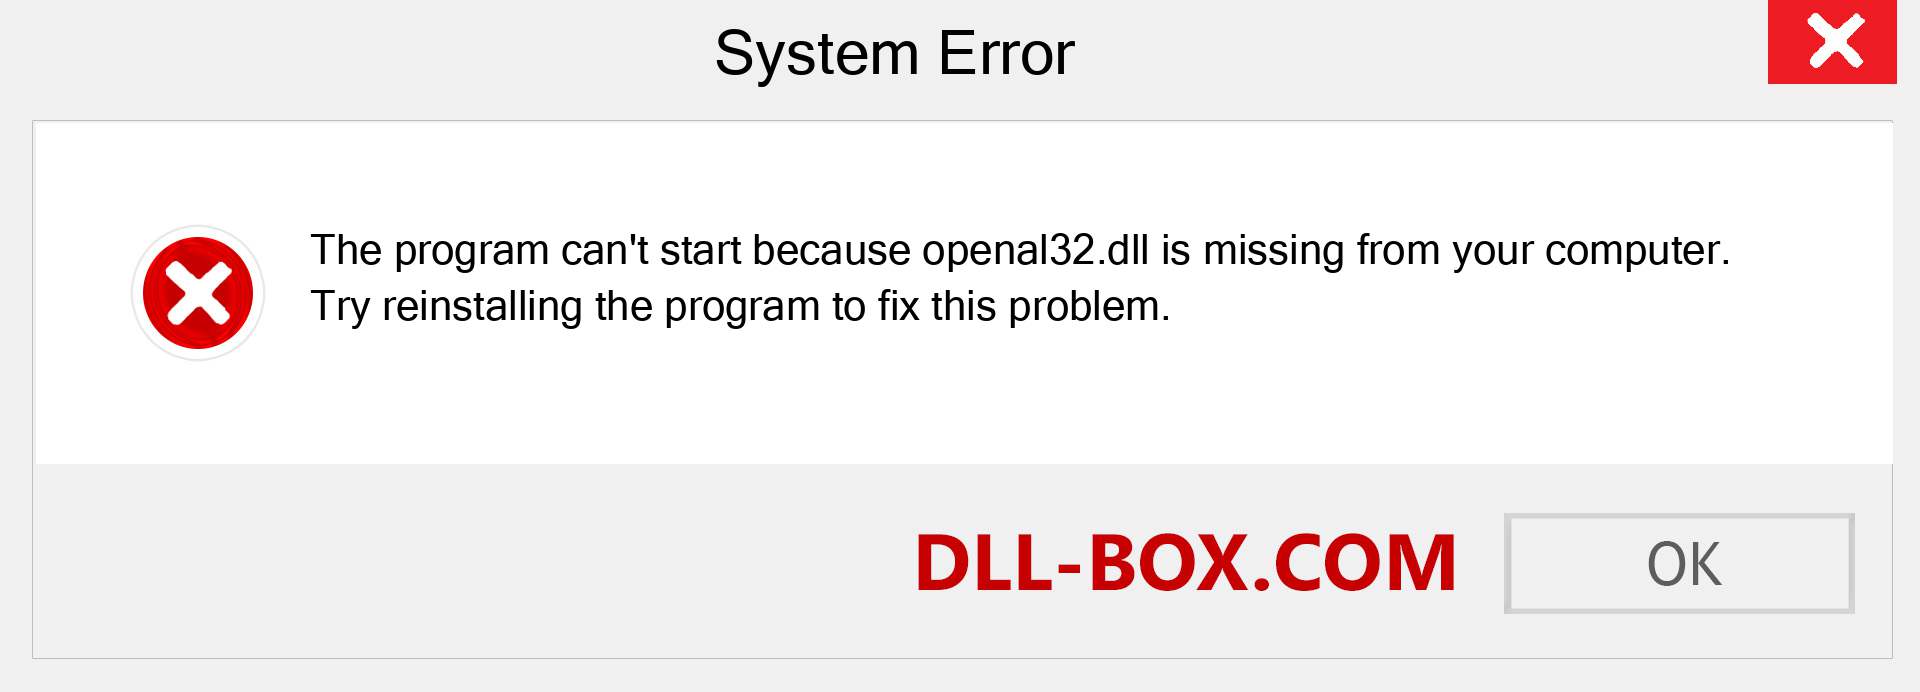  openal32.dll file is missing?. Download for Windows 7, 8, 10 - Fix  openal32 dll Missing Error on Windows, photos, images